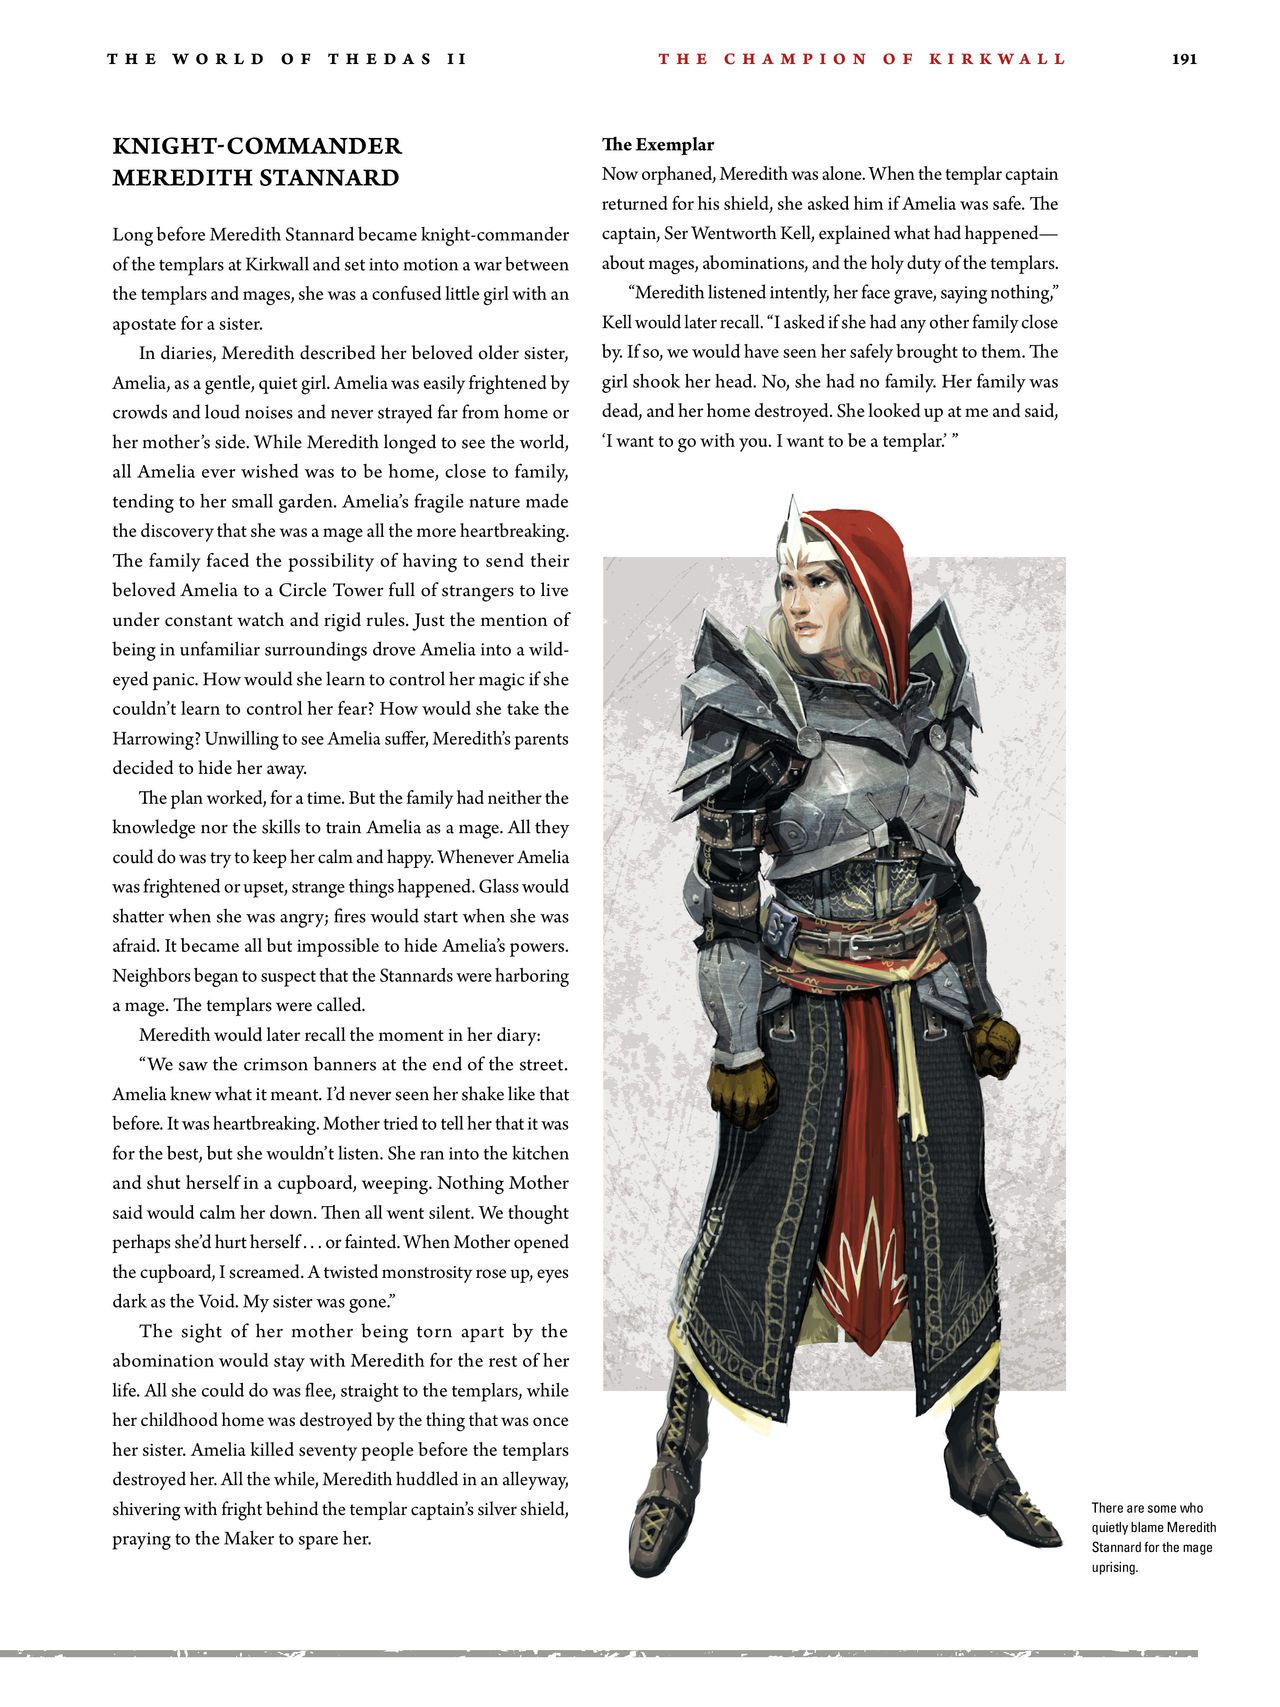 Dragon Age - The World of Thedas v02 186